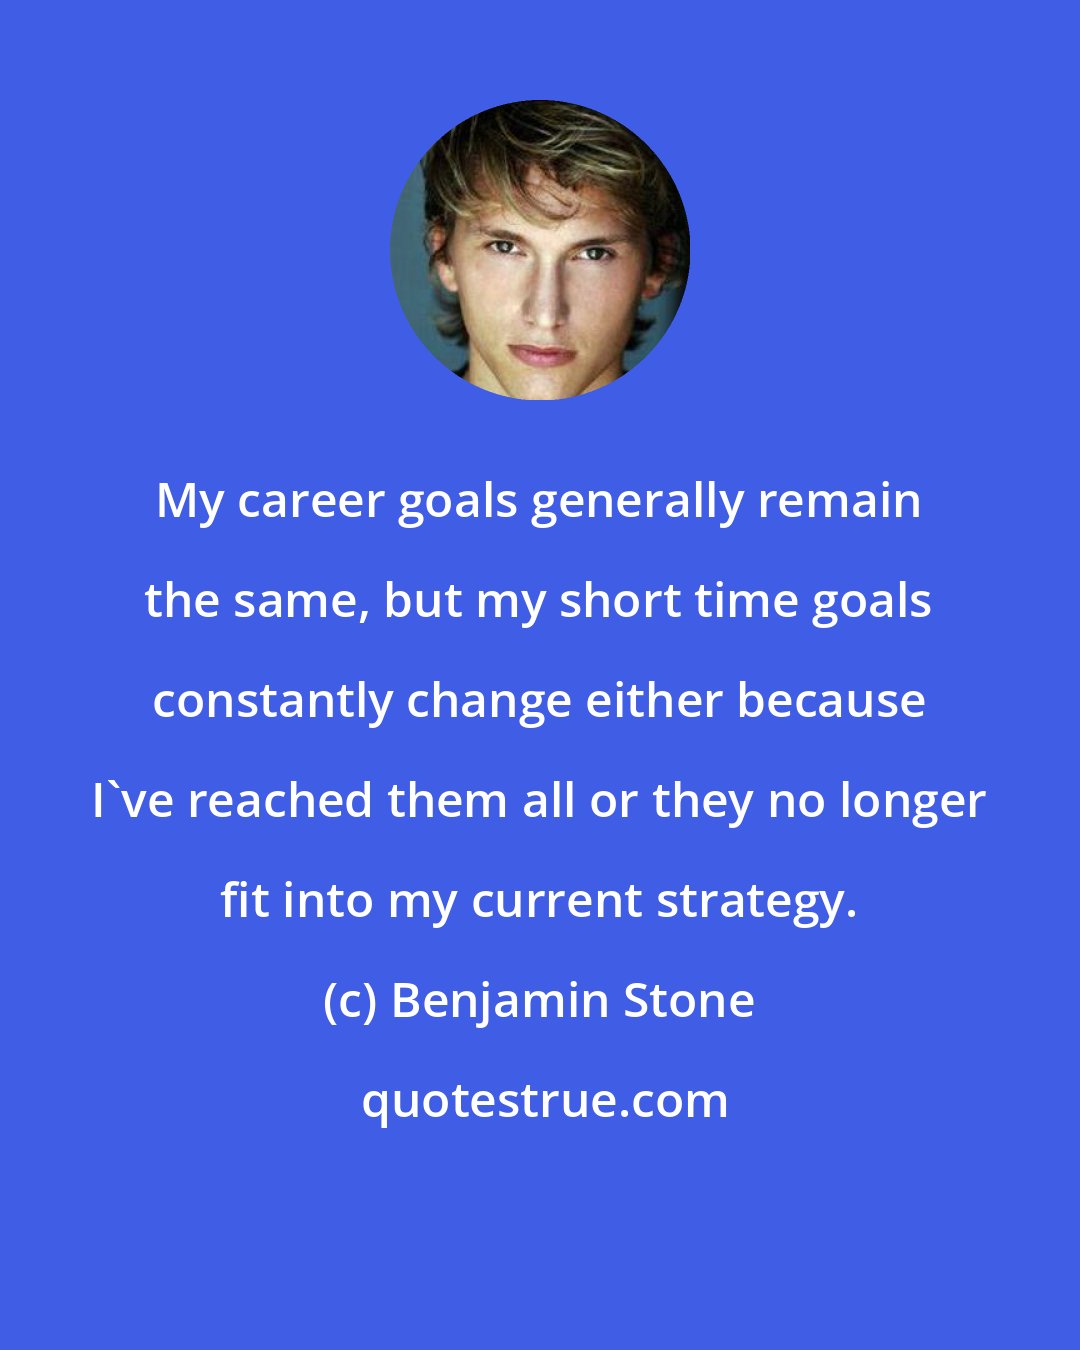 Benjamin Stone: My career goals generally remain the same, but my short time goals constantly change either because I've reached them all or they no longer fit into my current strategy.